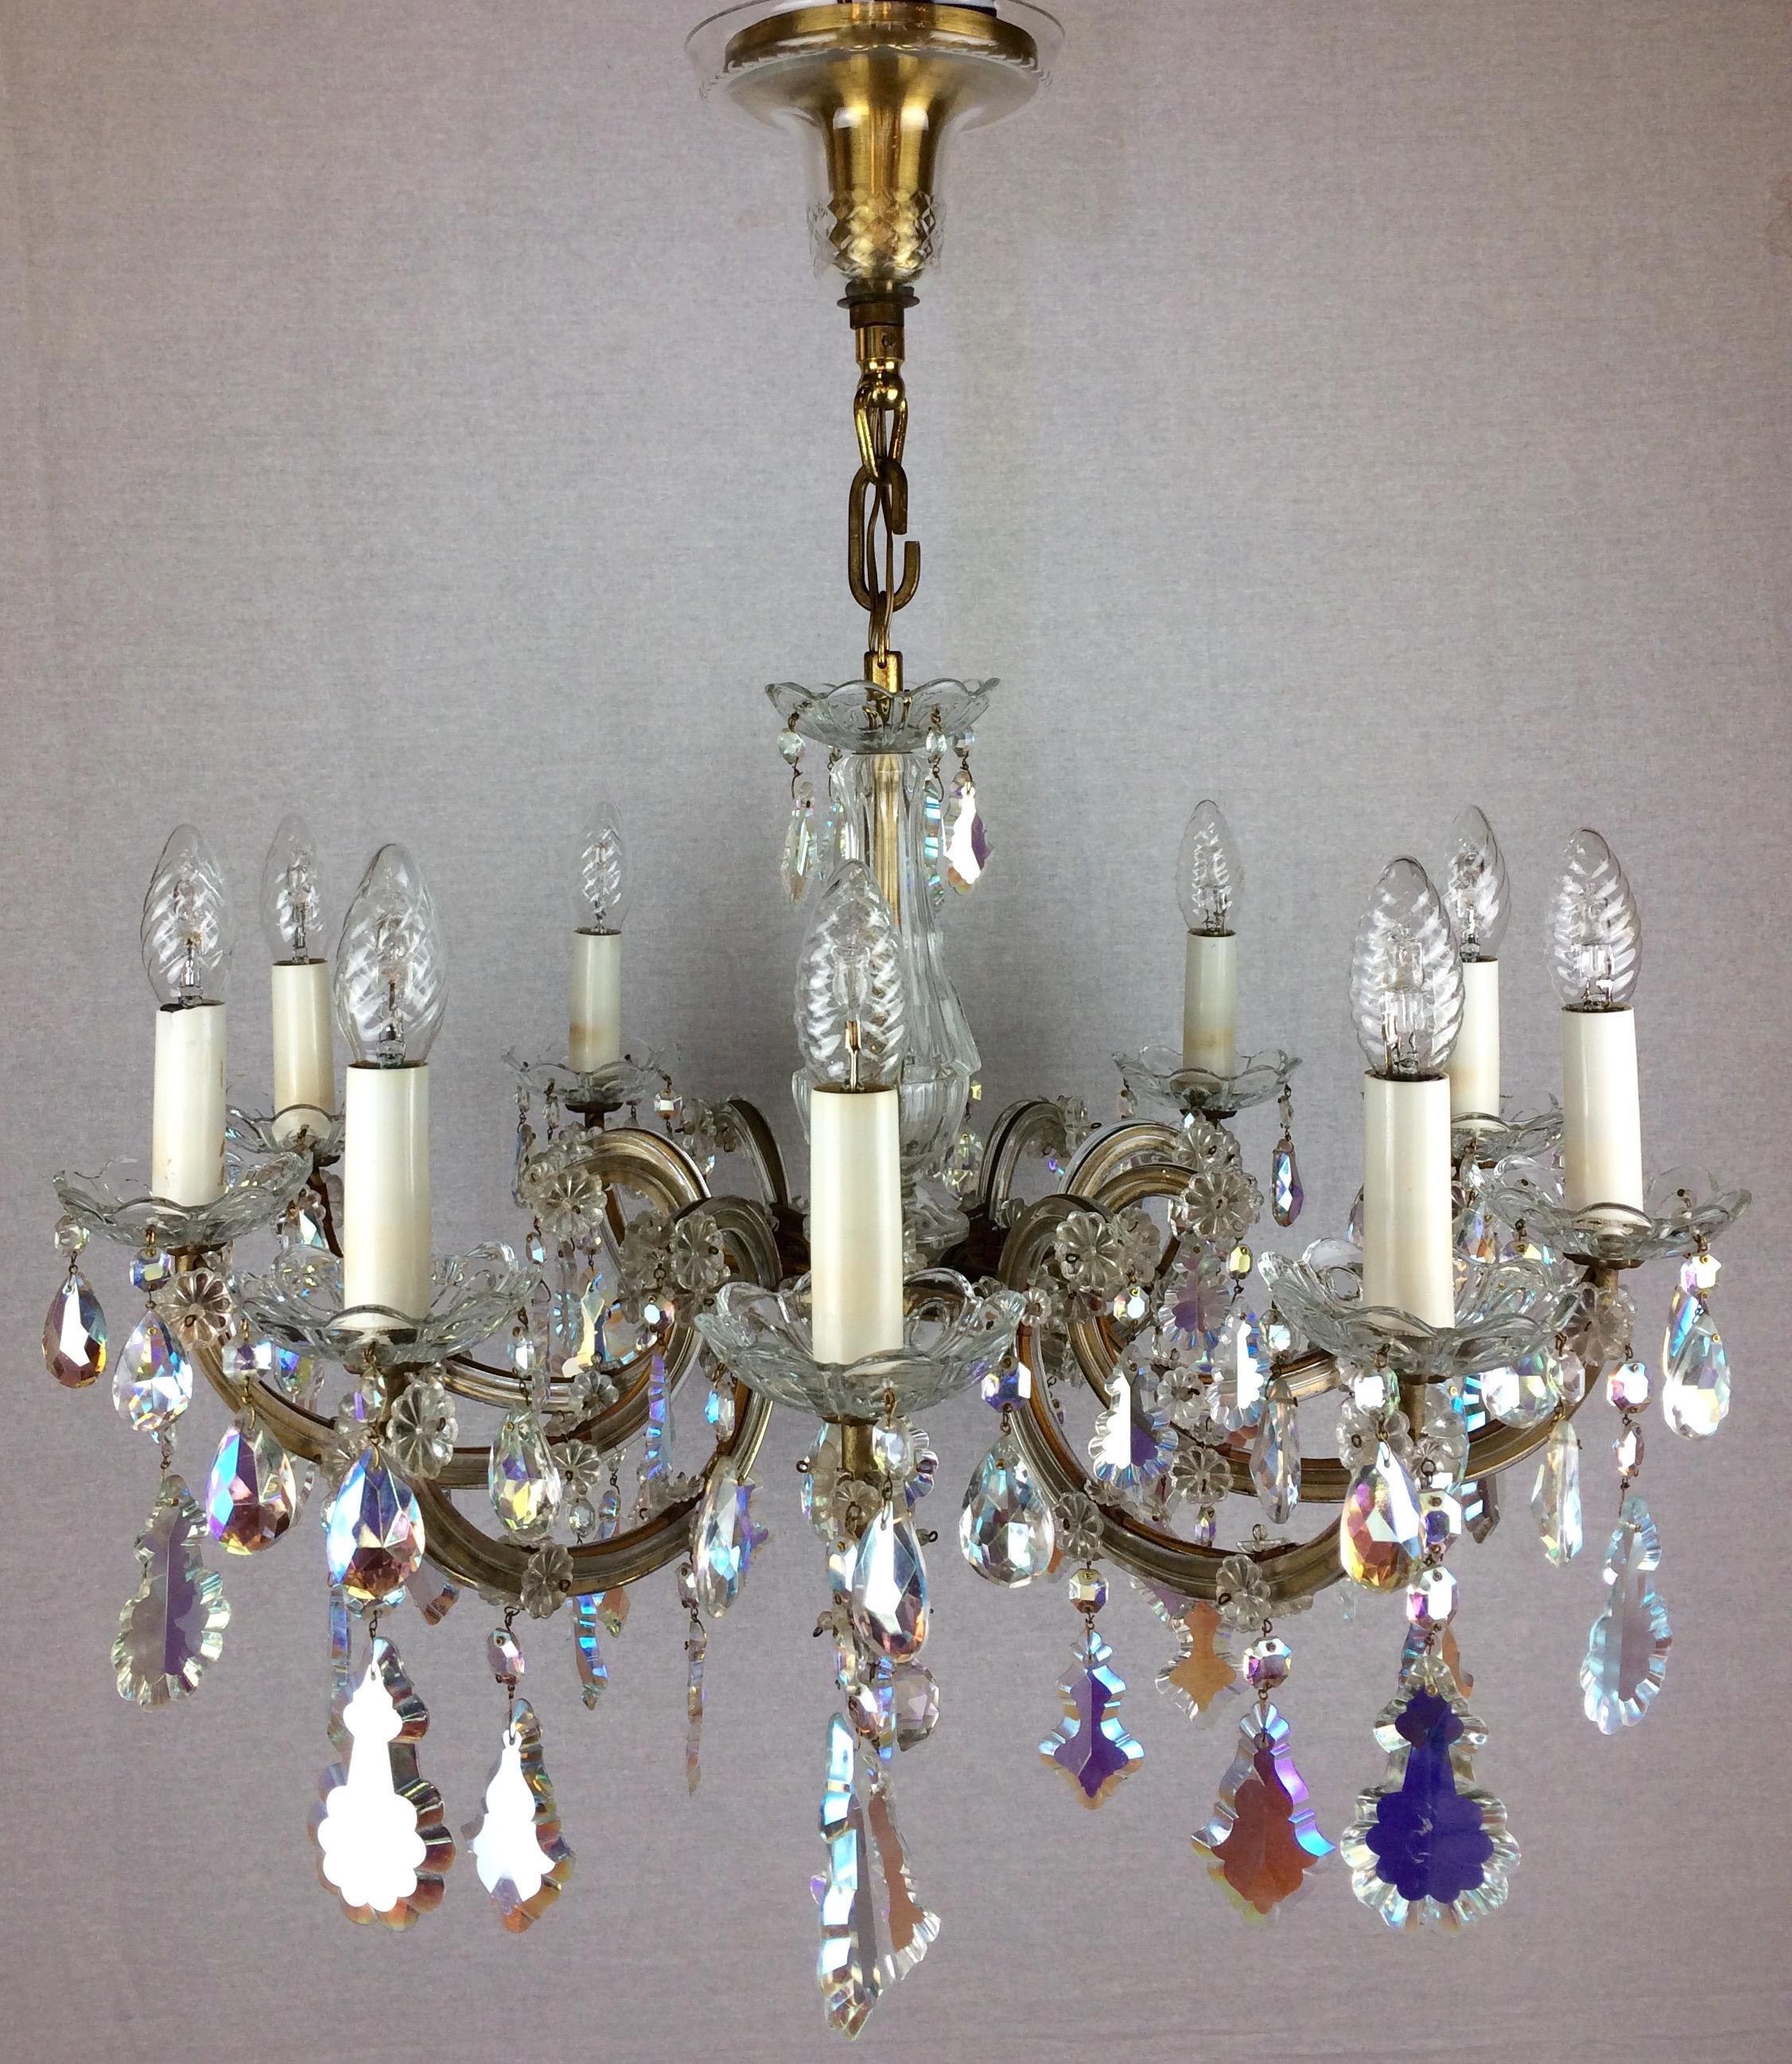 French Marie Therese Chandelier with Colored Rock Crystals 10 Arms In Good Condition For Sale In Miami, FL